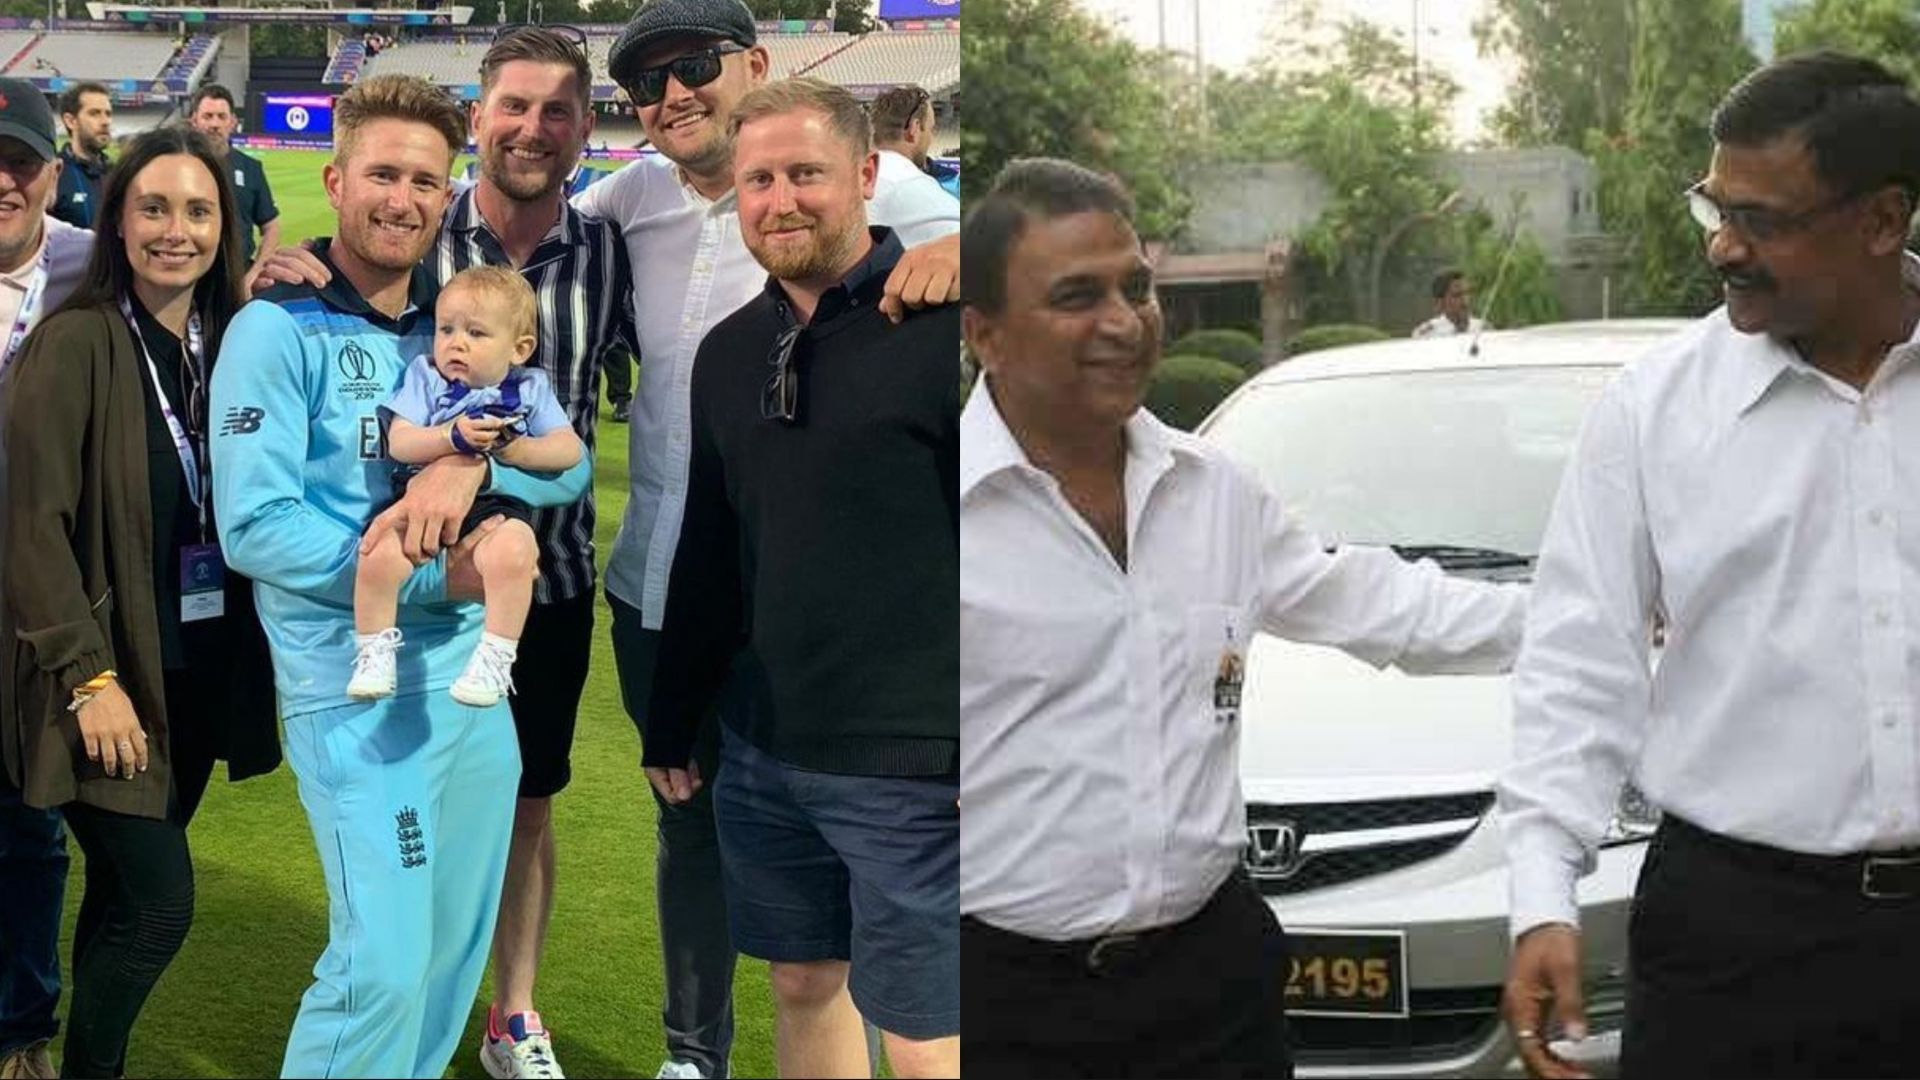 Liam Dawson and Sunil Valson were part of World Cup-winning teams (Image: Instagram)